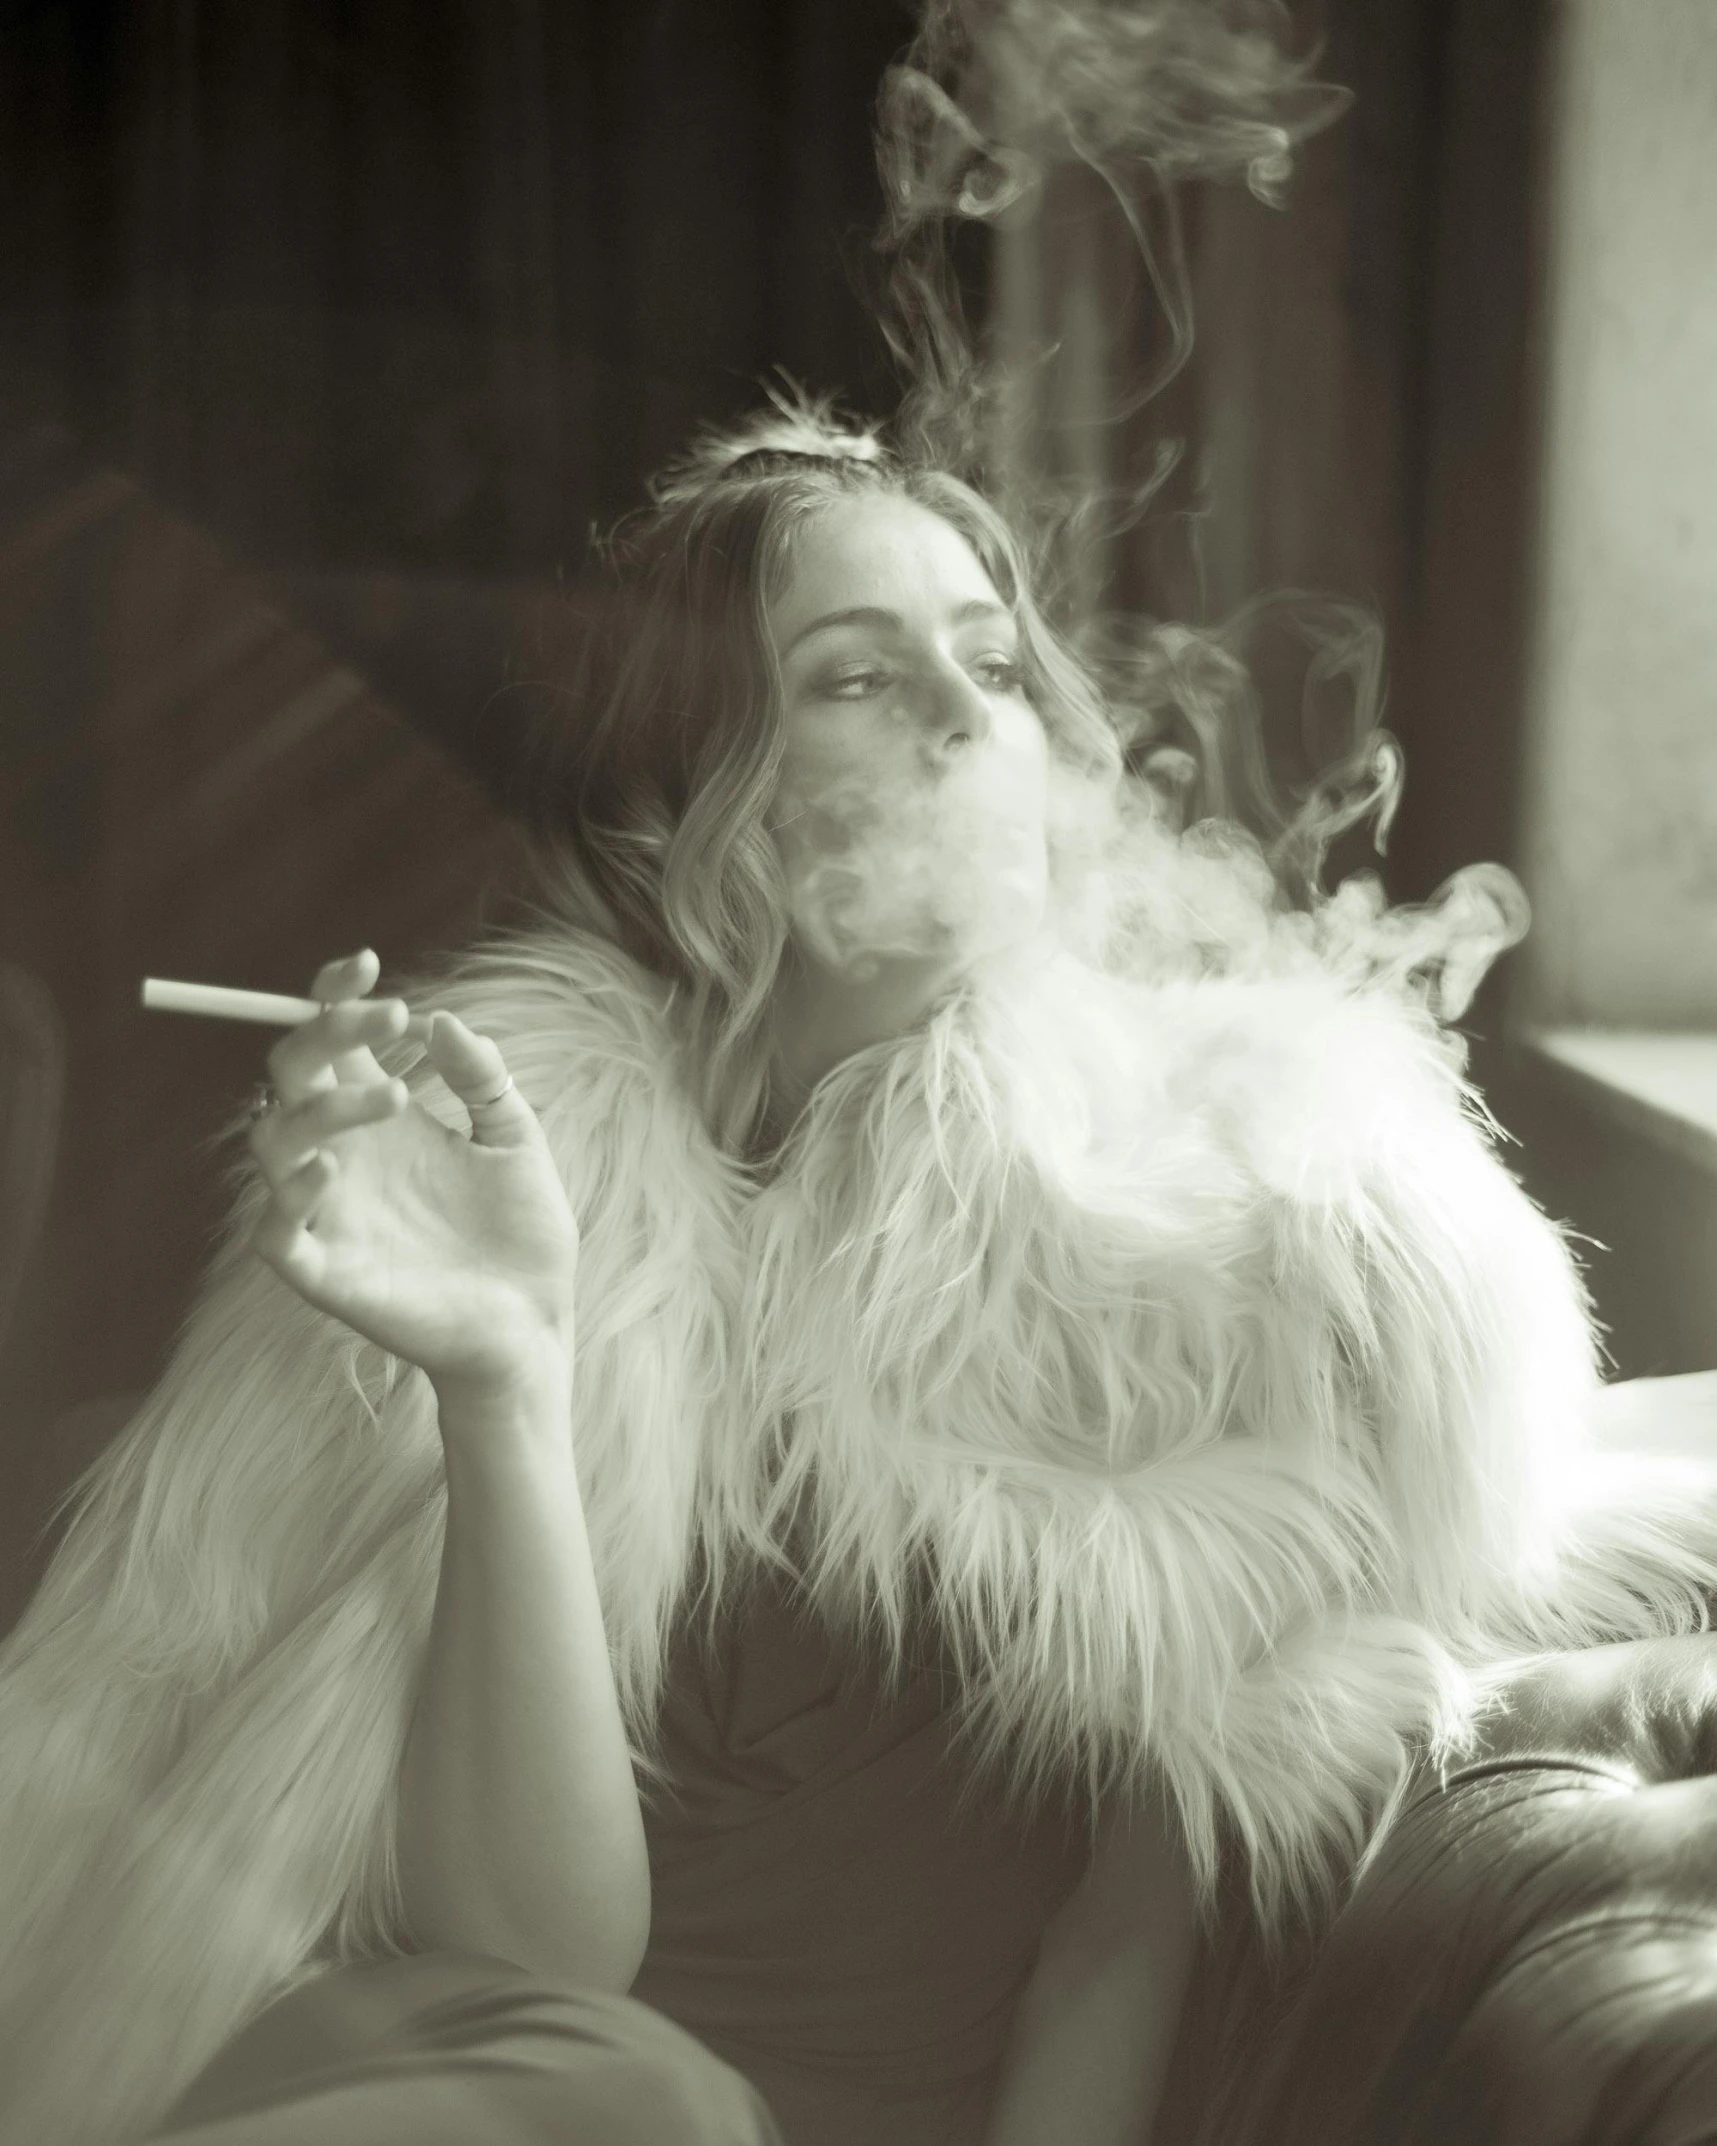 an older woman sitting on a couch smoking a cigarette